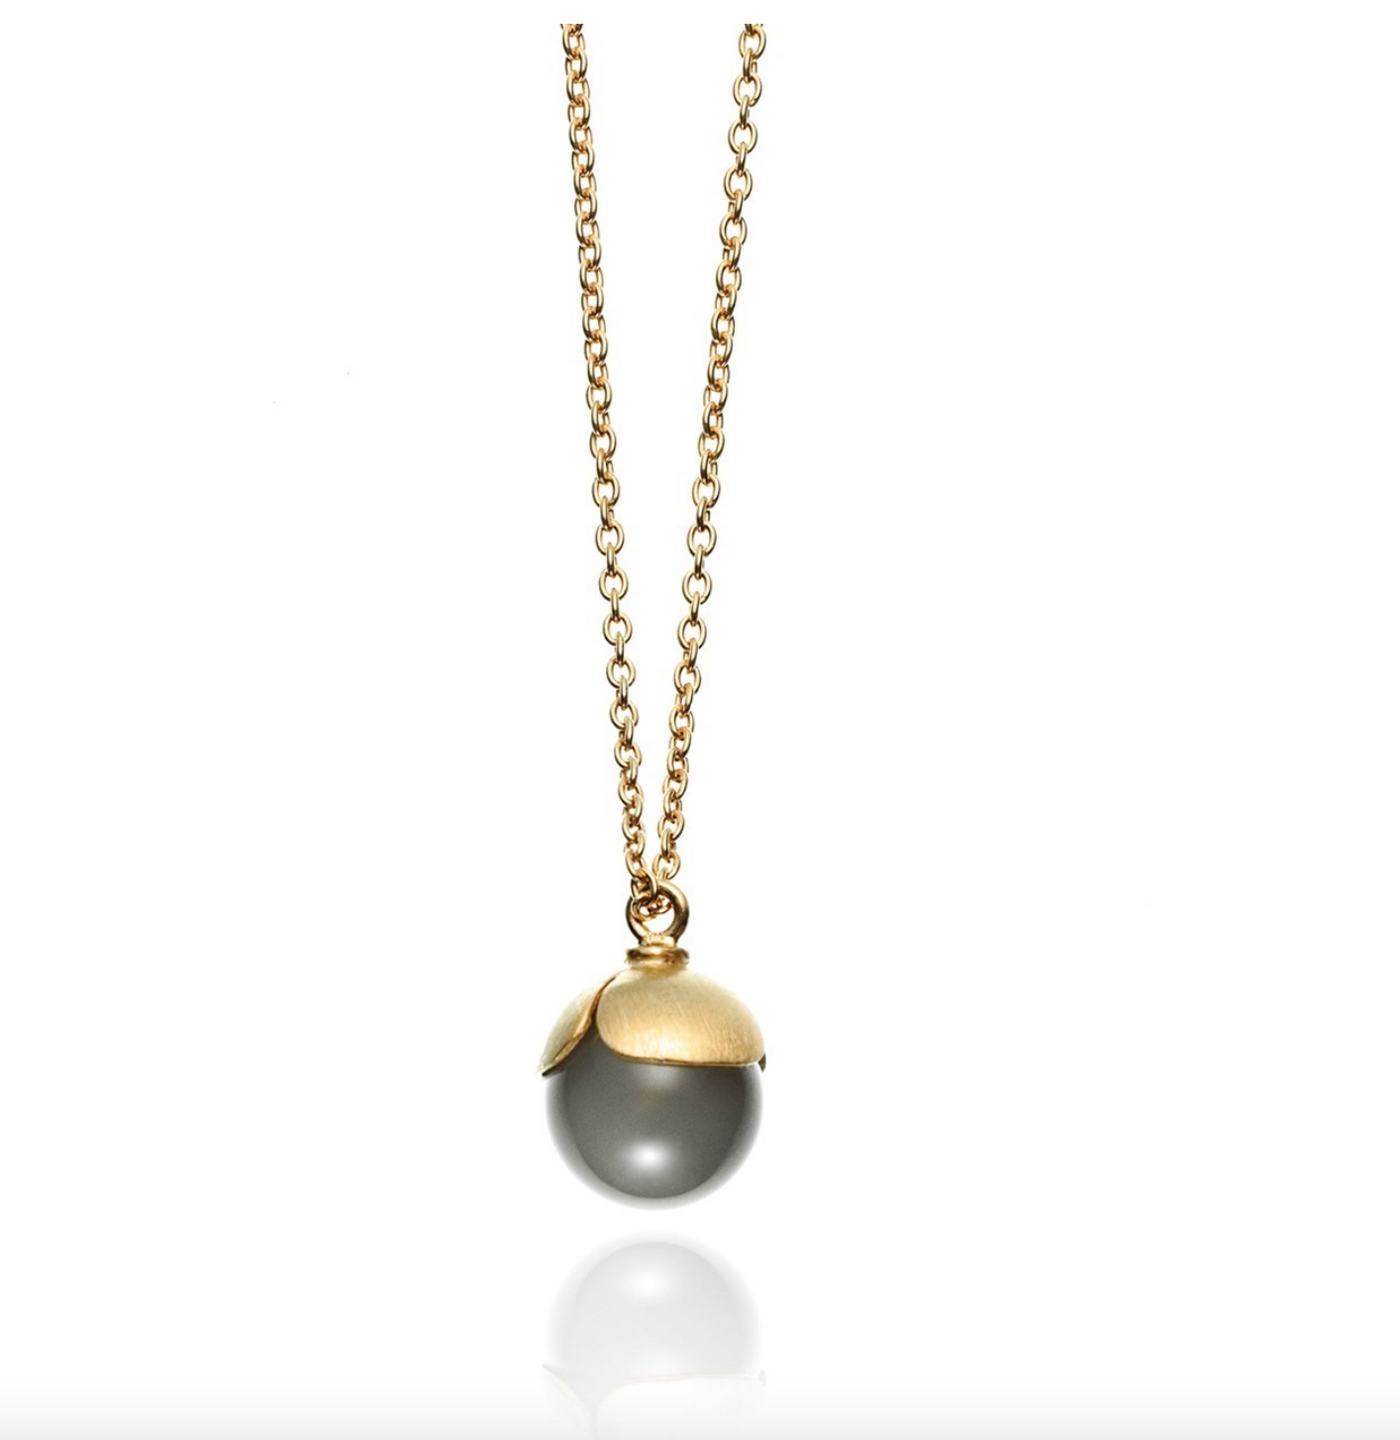 Nada Gold Gray necklace